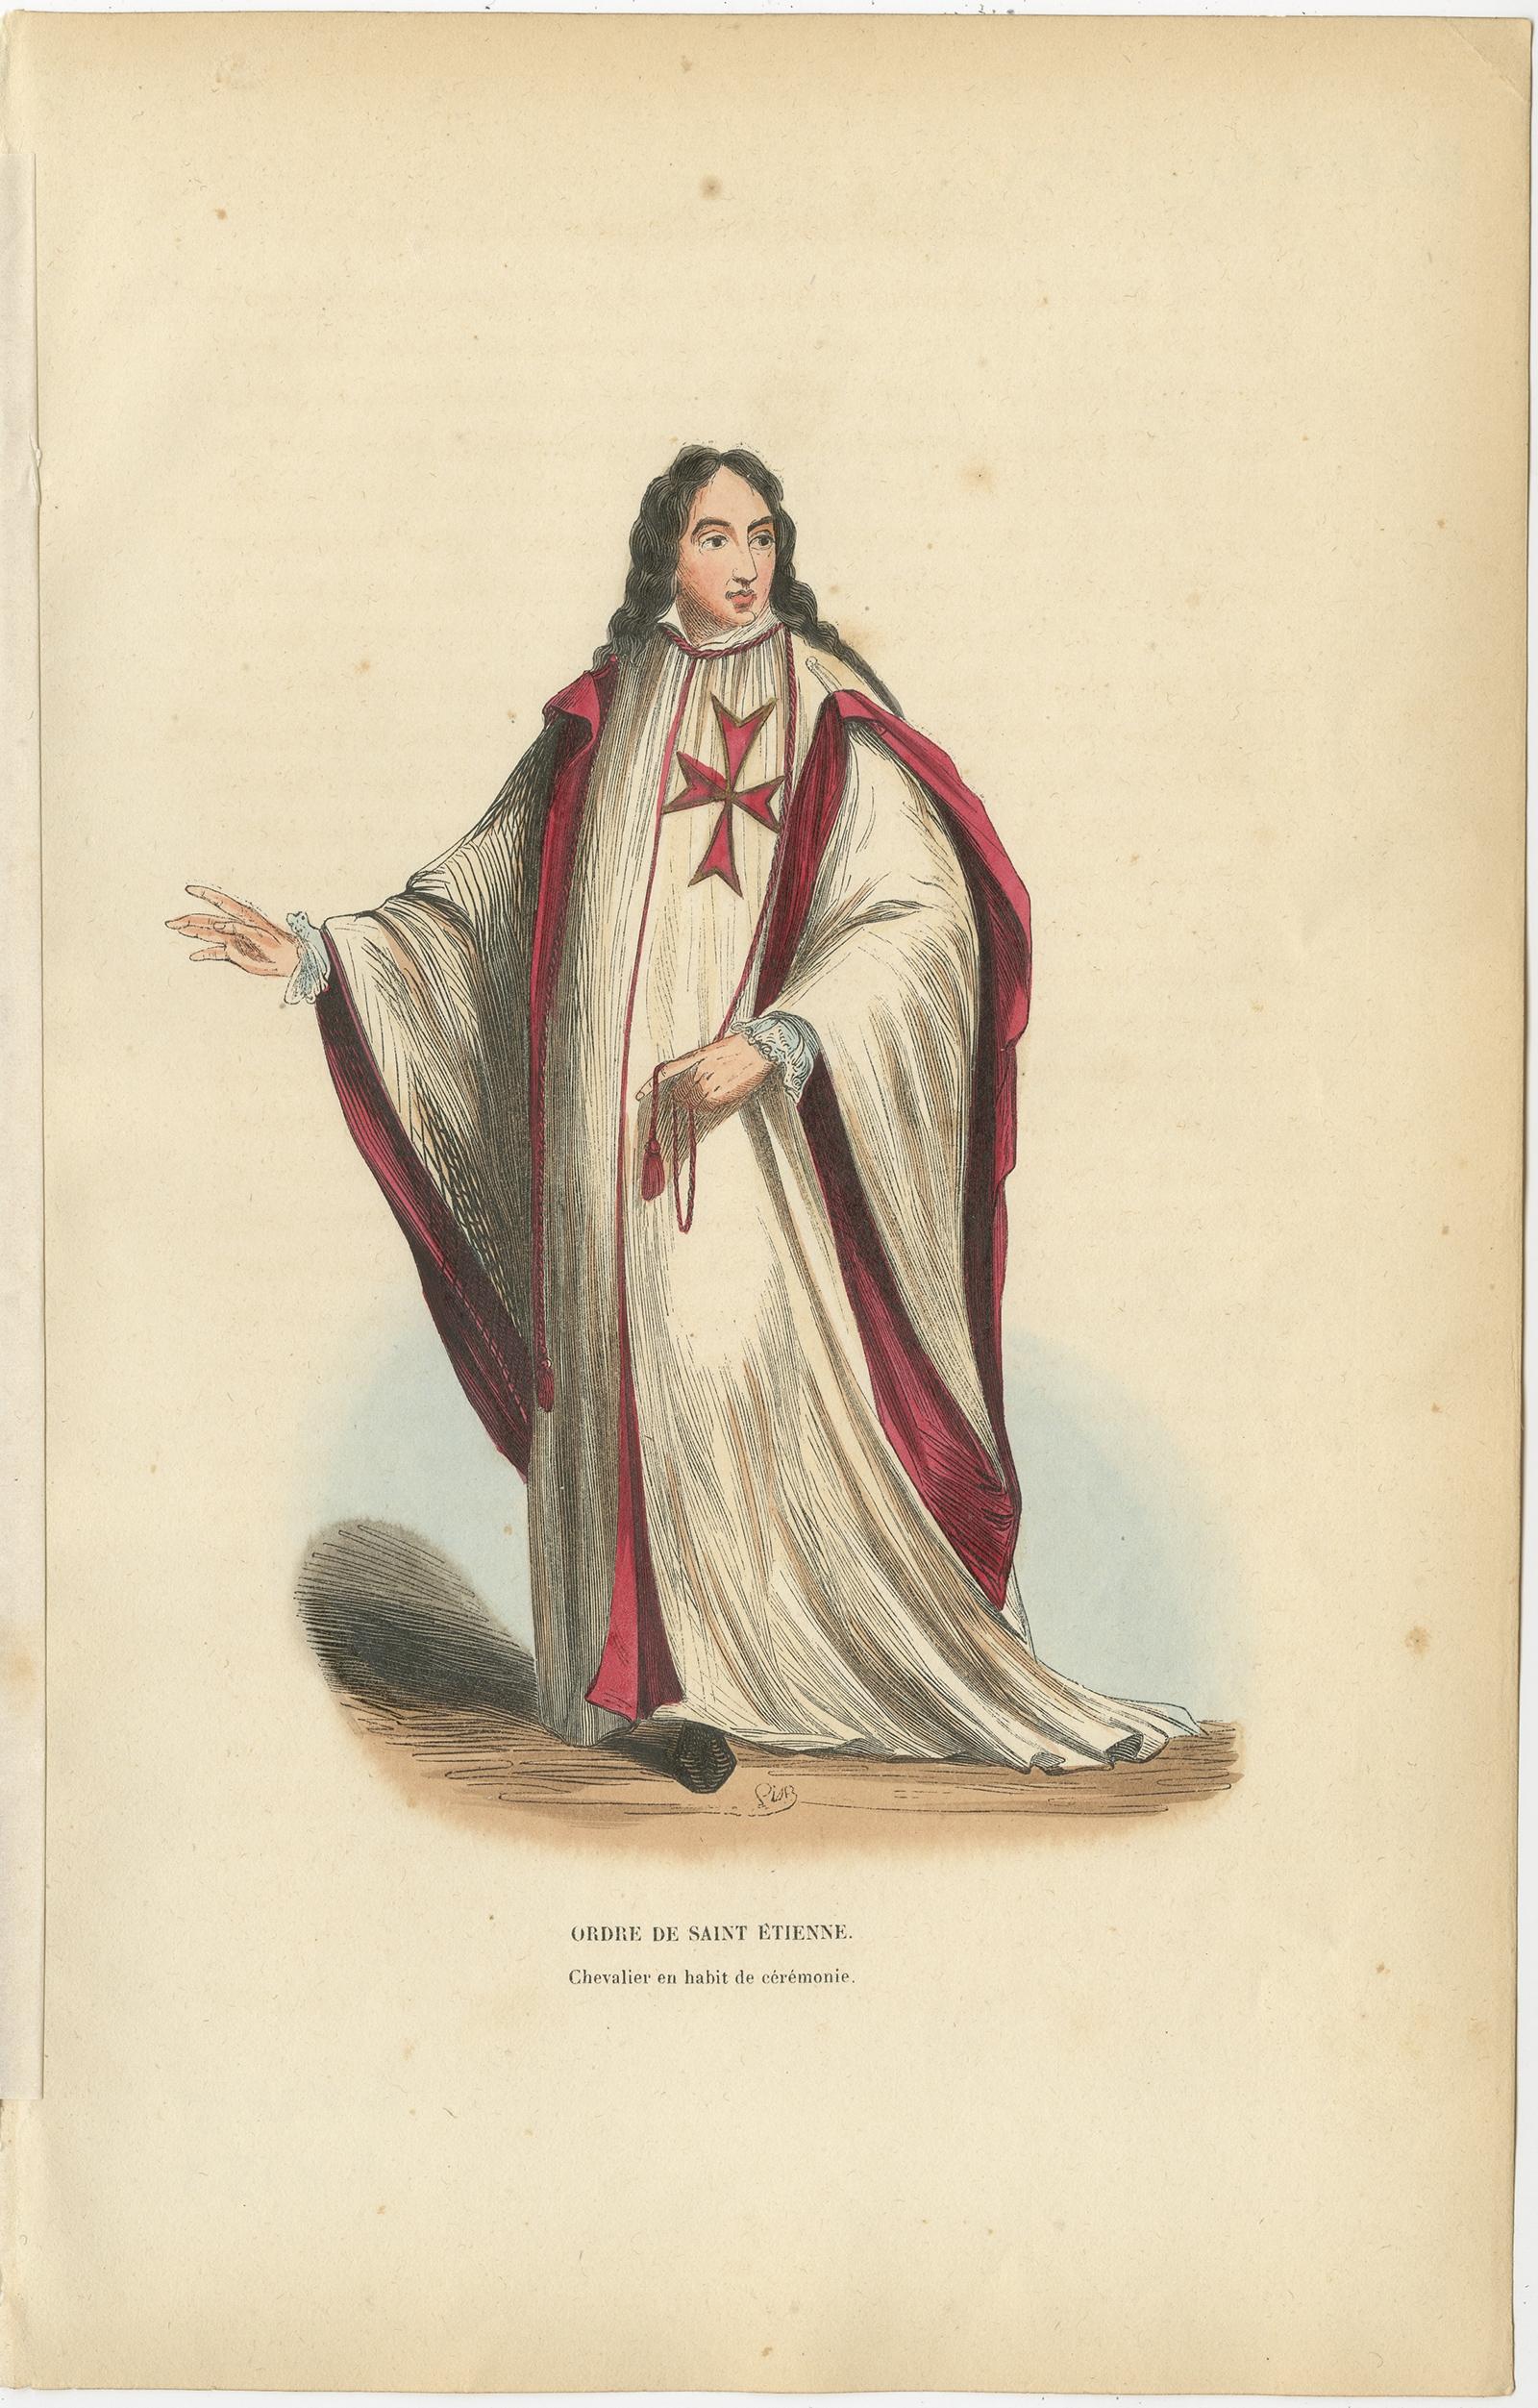 Antique print titled 'Ordre de Saint Étienne'. 

Print of a Knight in ceremonial robes of the Order of Saint Stephen, a Hungarian order of chivalry. This print originates from 'Histoire et Costumes des Ordres Religieux'.

Artists and Engravers: